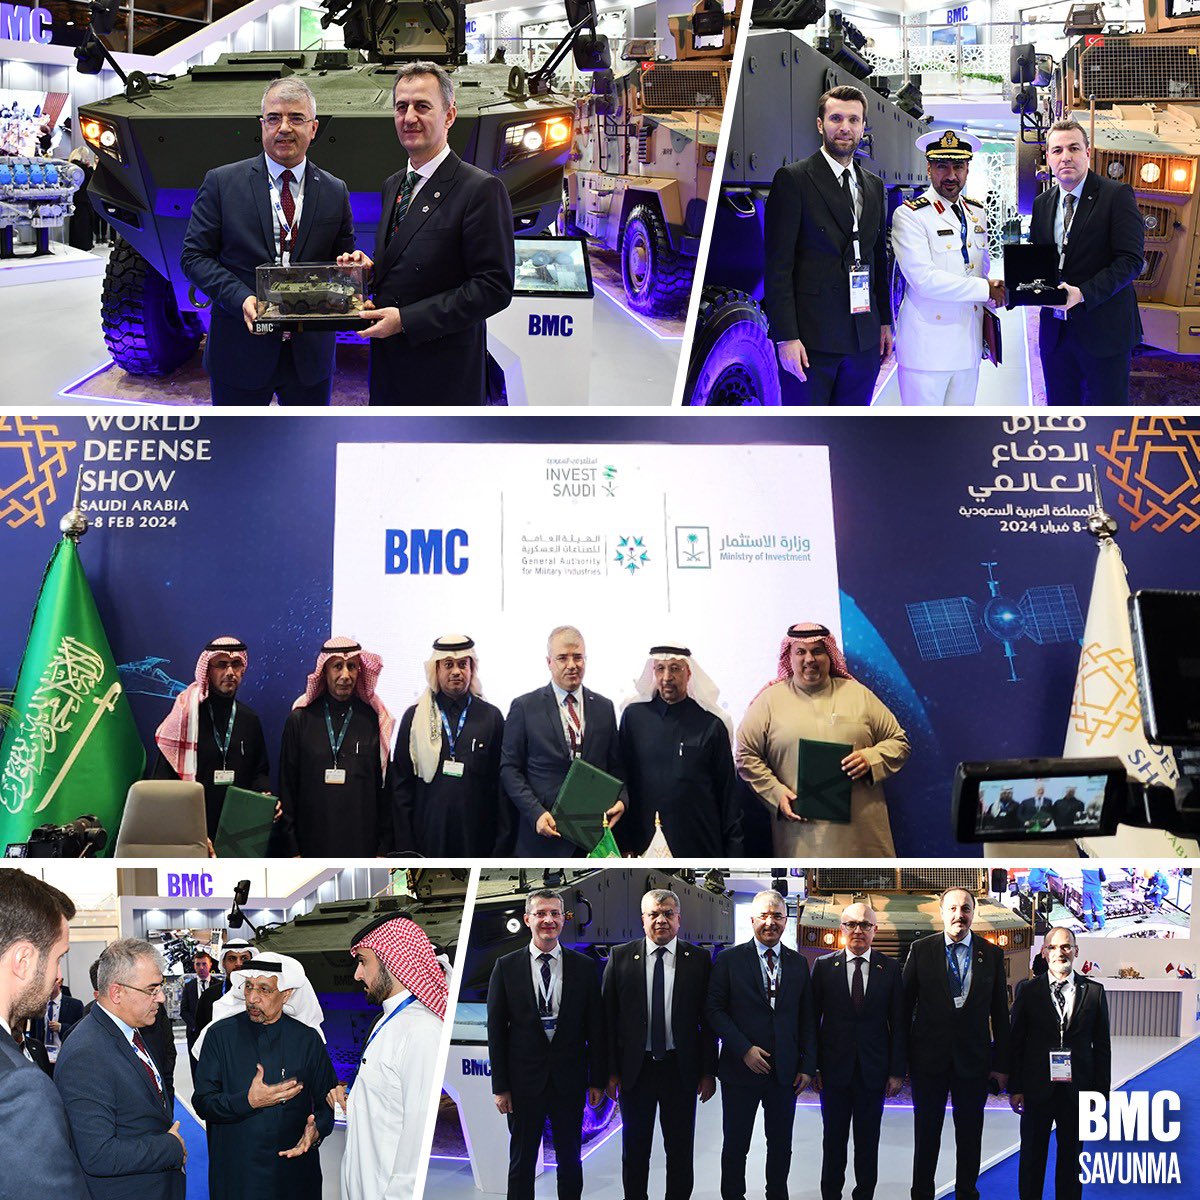 💪 Türkiye's land vehicles powerhouse @bmcsavunma was another successful company who completed the #WDS2024 with multiple signed agreements including with GAMI, BARZAN & Saudi Investment Ministry.  Details to follow. #BMCSavunma #WorldDefenseShow #BMC 🇹🇷🇸🇦